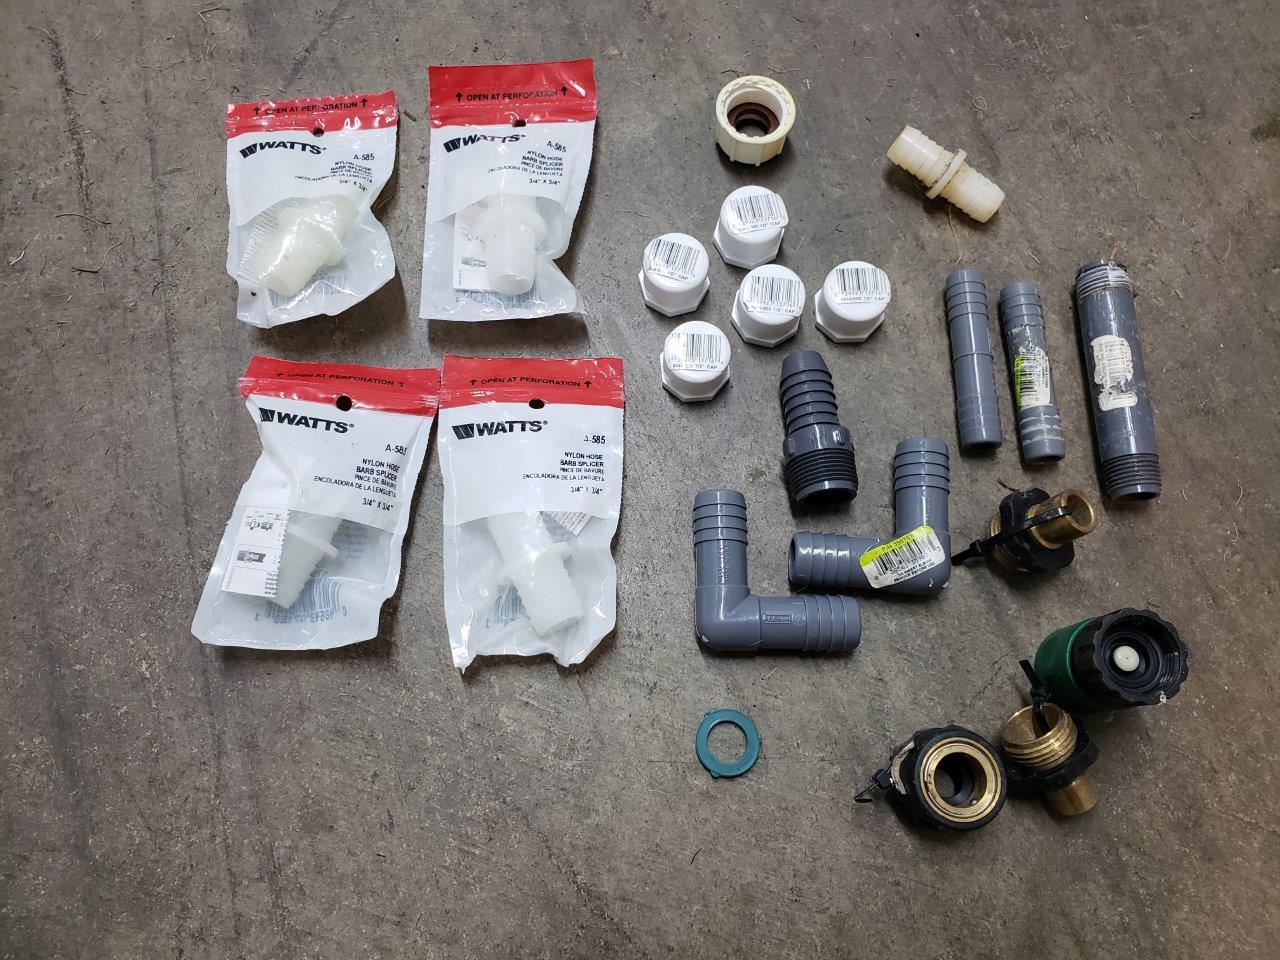 A bunch of miscellanous outdoor piping fittings and caps